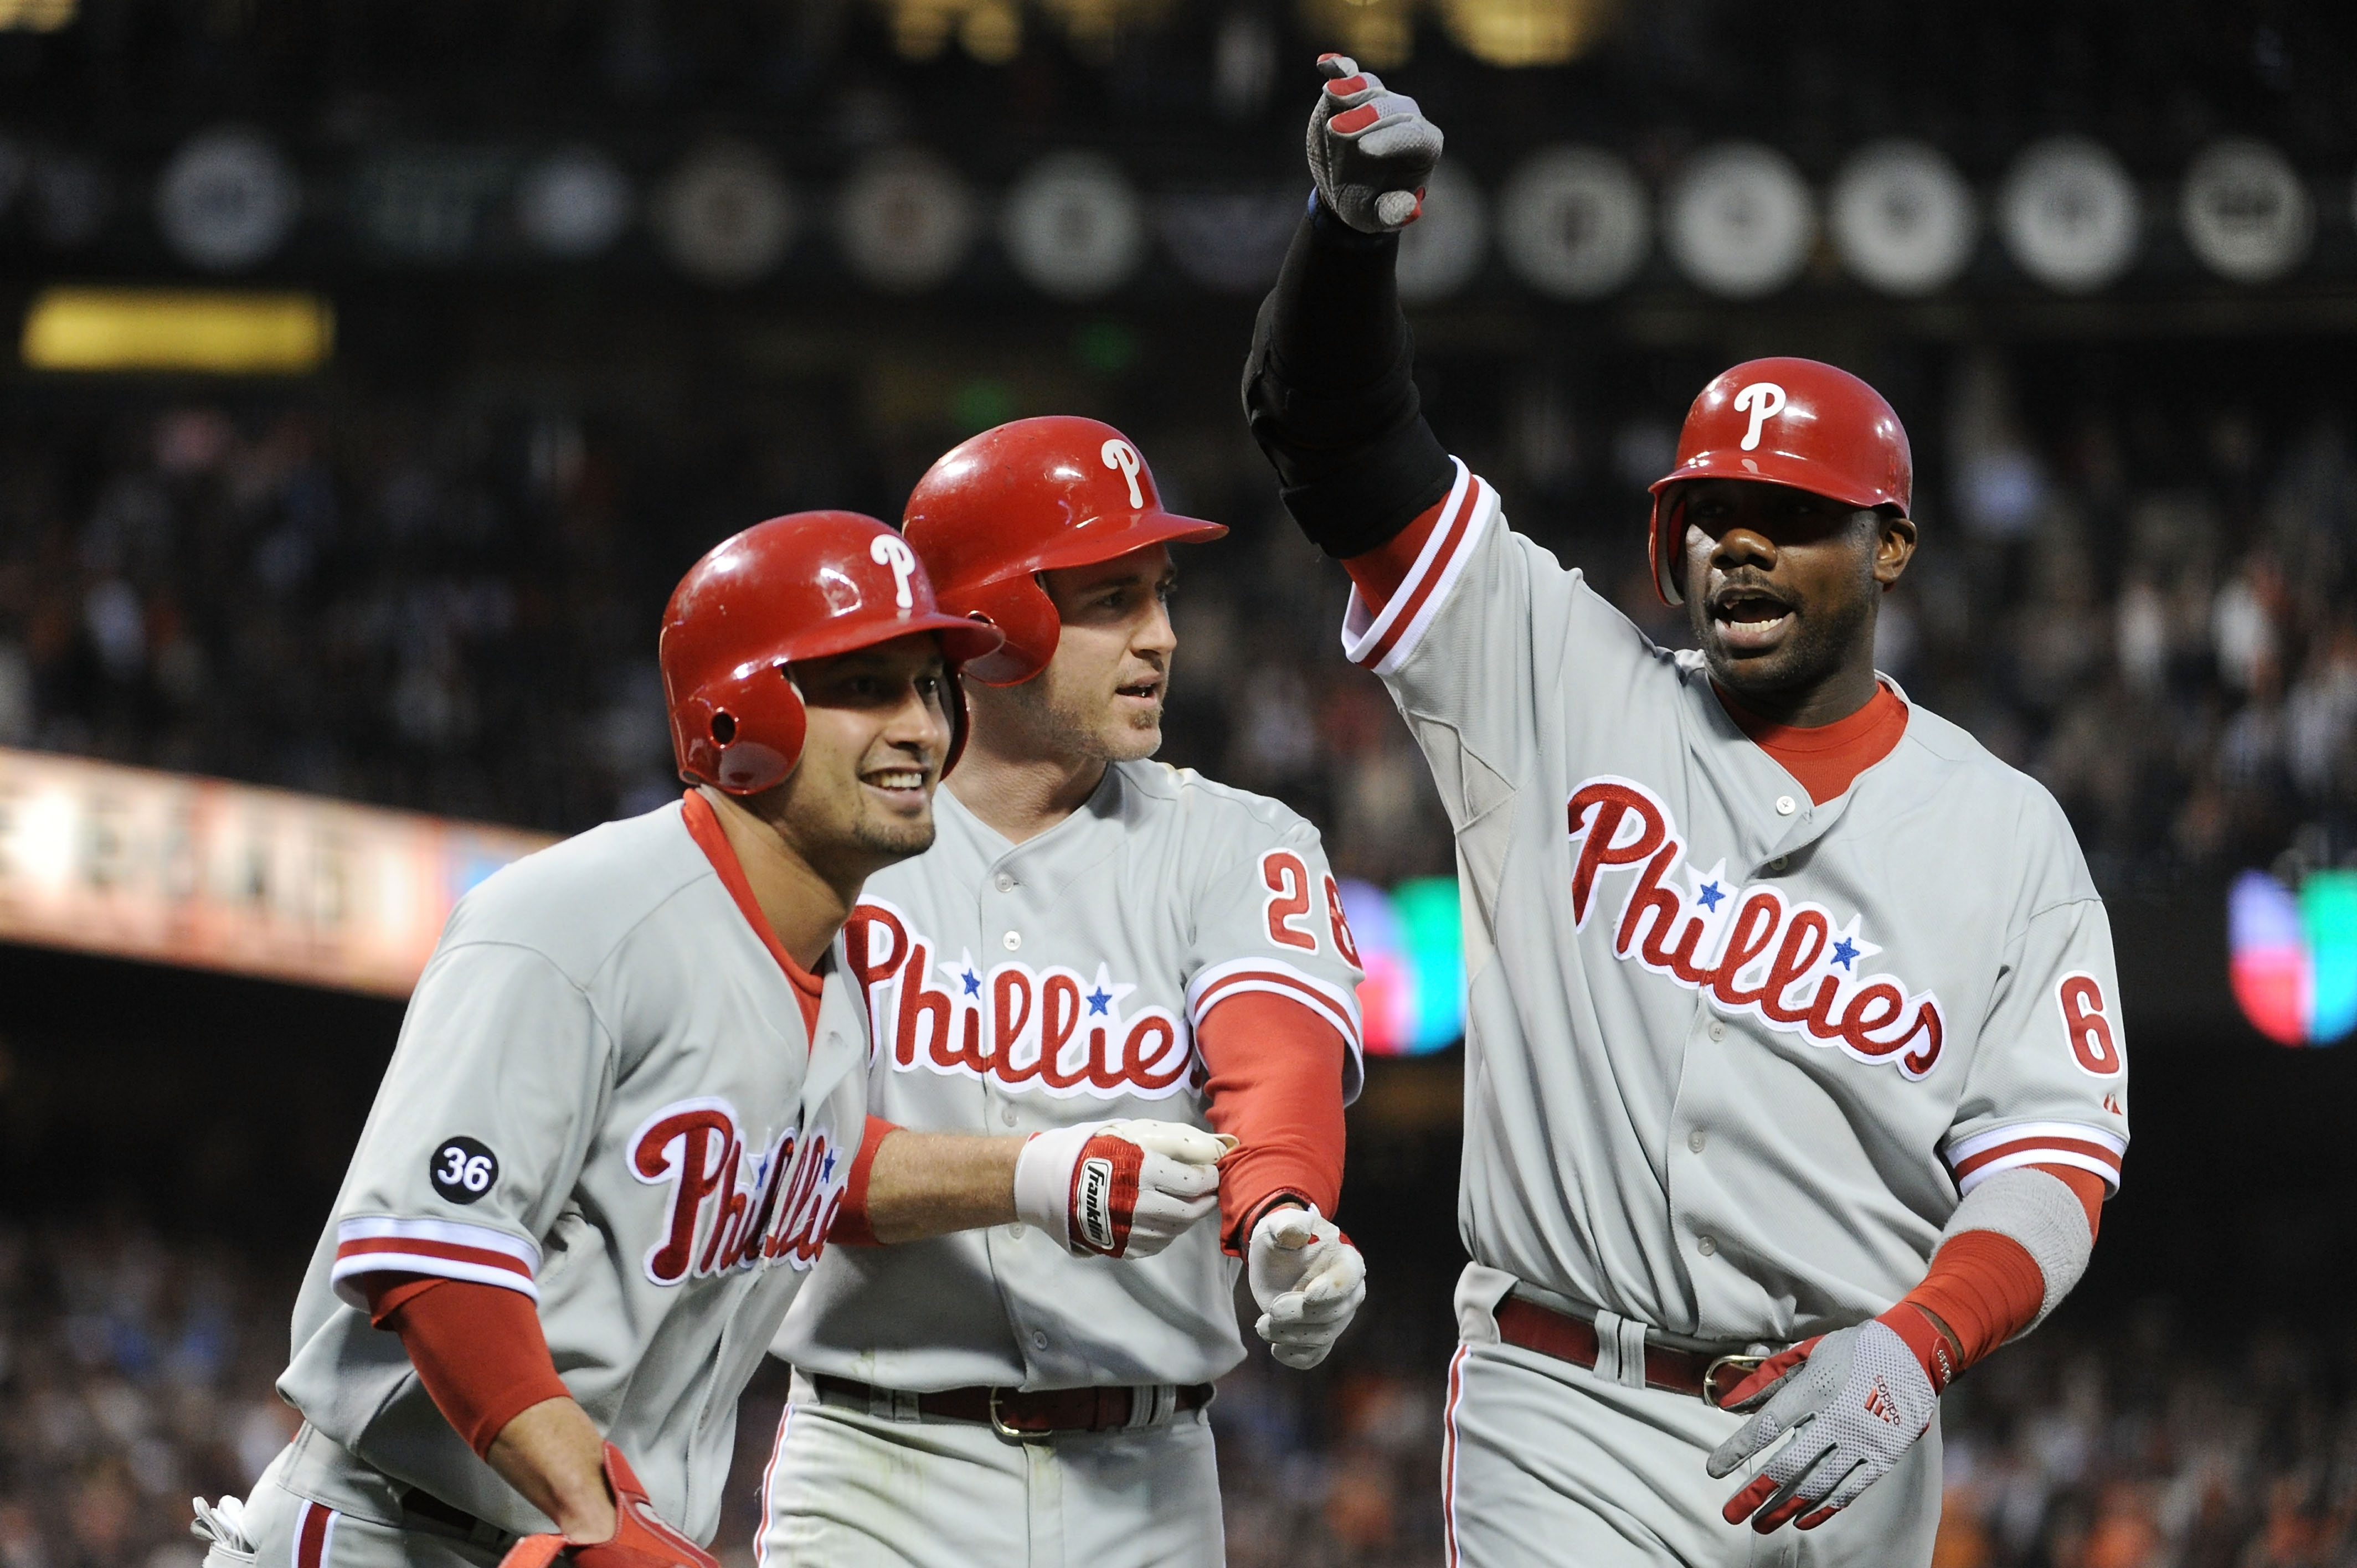 SAN FRANCISCO - OCTOBER 20:  (L-R) Shane Victorino #8, Chase Utley #26, and Ryan Howard #6 of the Philadelphia Phillies celebrate after Victorino and Utley scored on a double by Placido Polanco #27 against the San Francisco Giants in Game Four of the NLCS